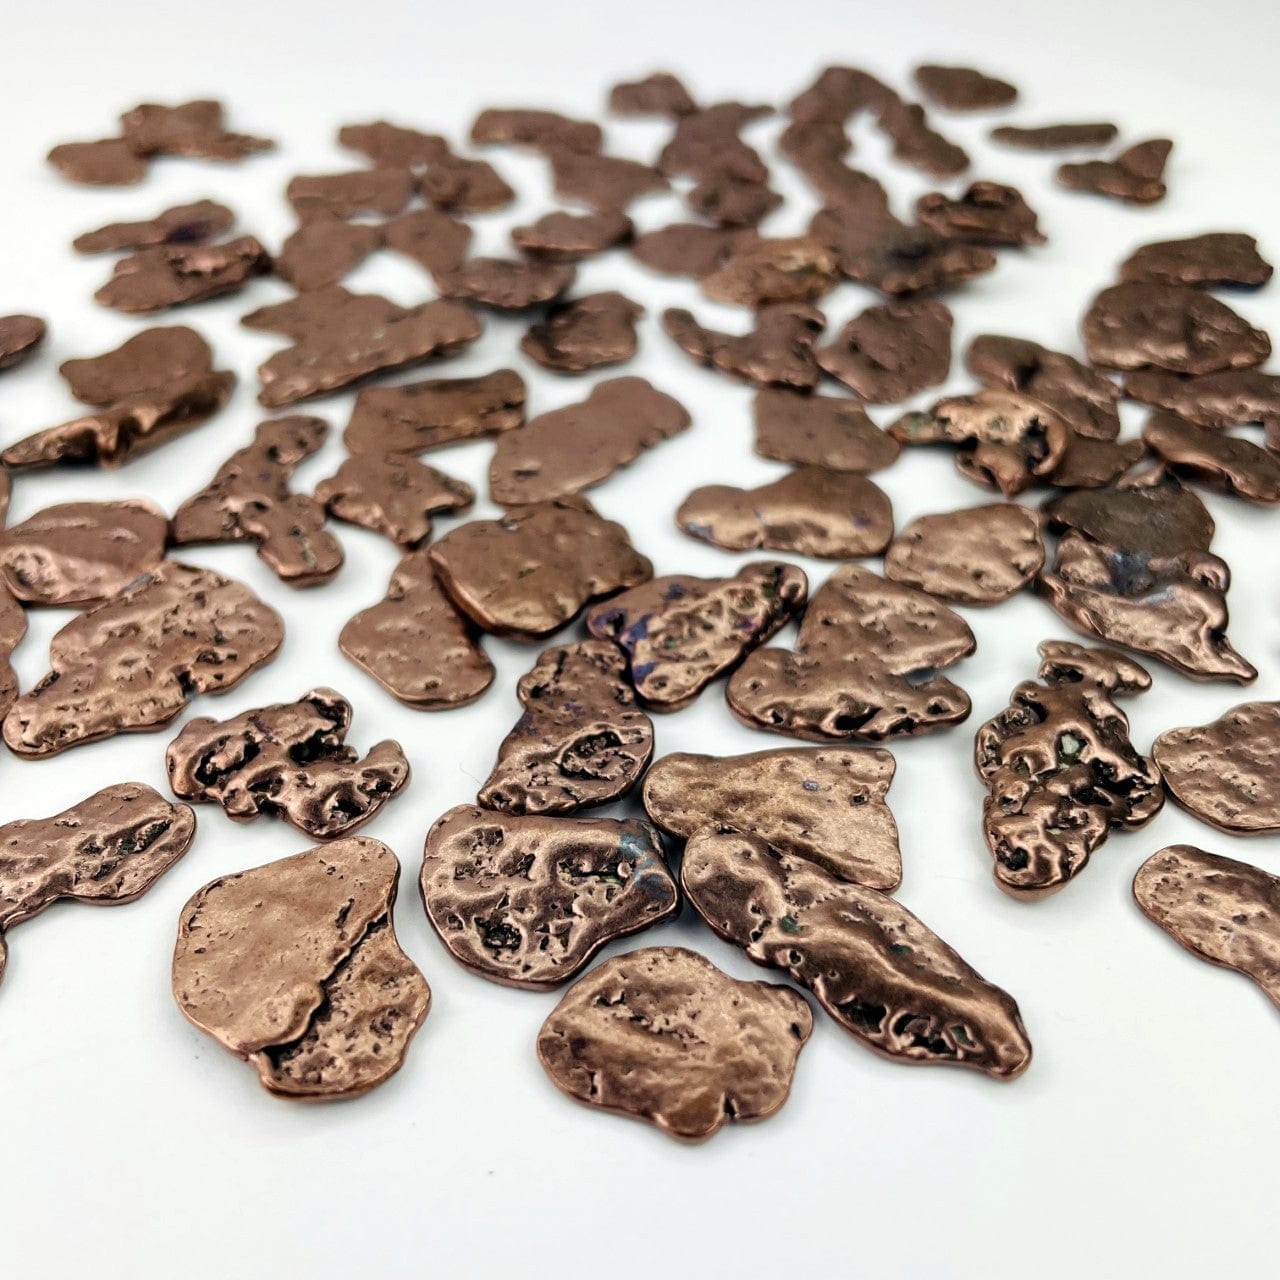 Copper Nuggets - Freeform Shapes from a side angle